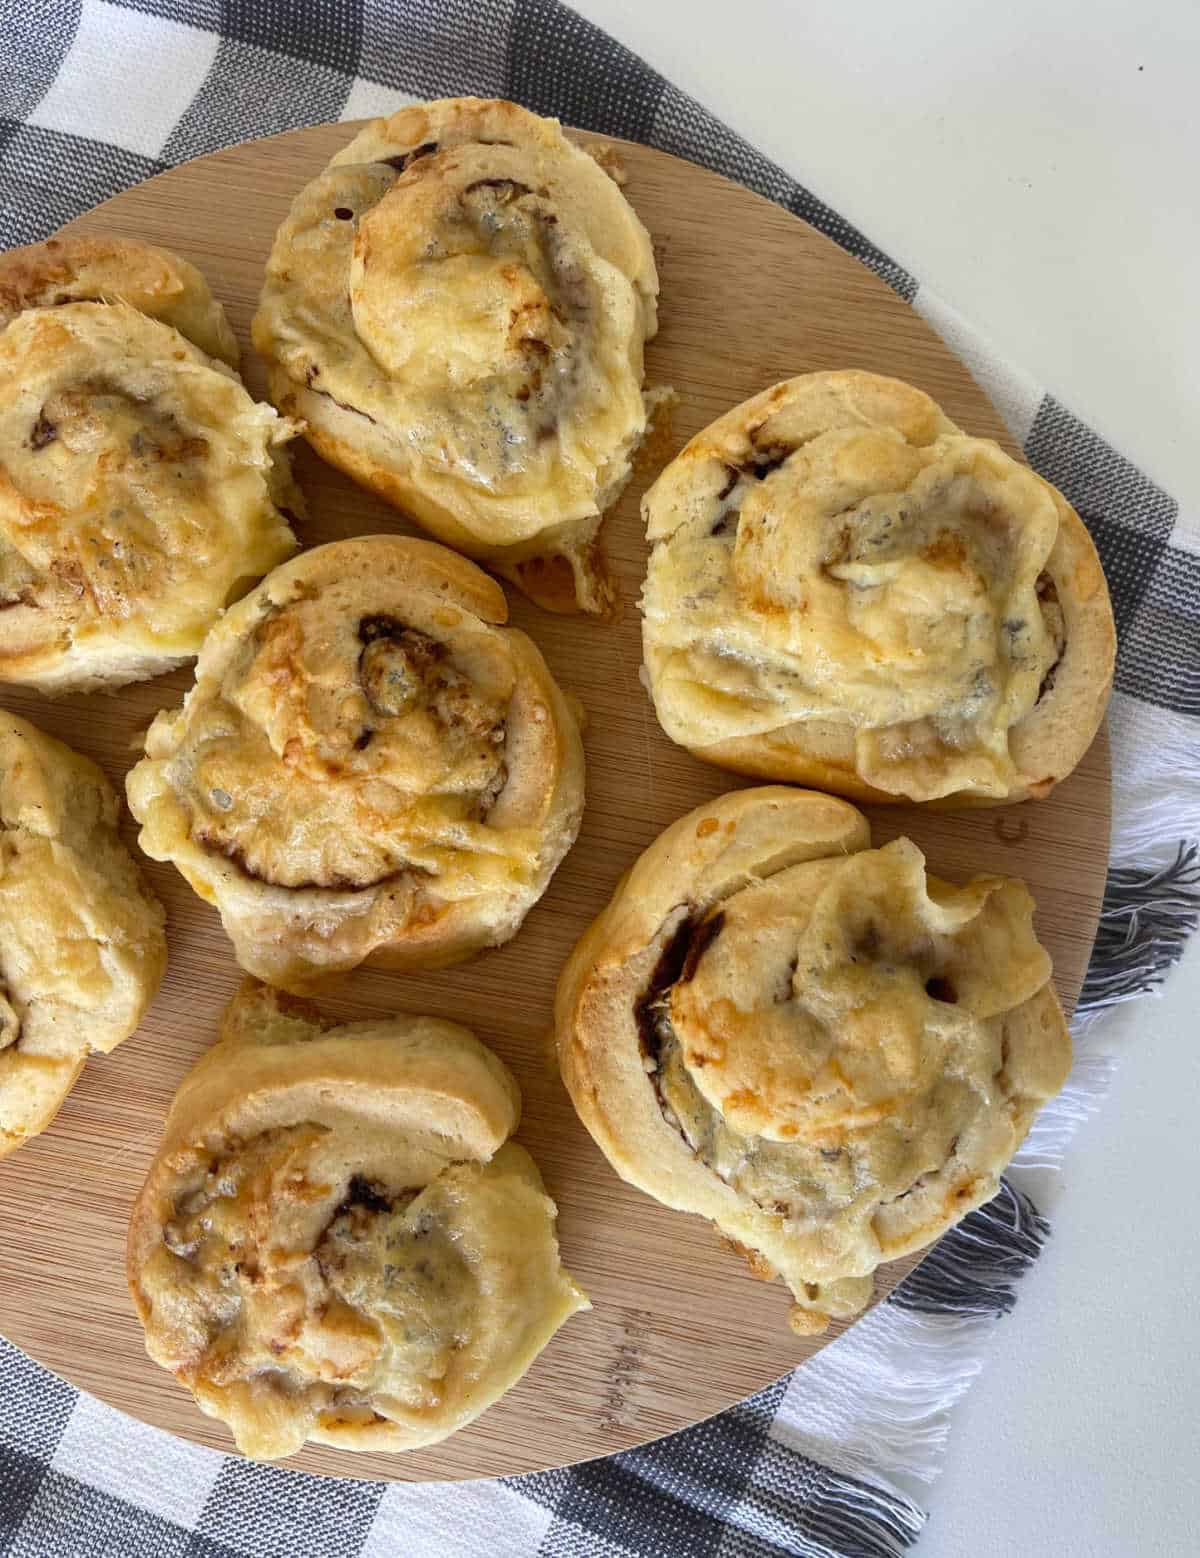 Overhead view of seven Vegemite and cheese scrolls on a round wooden board.